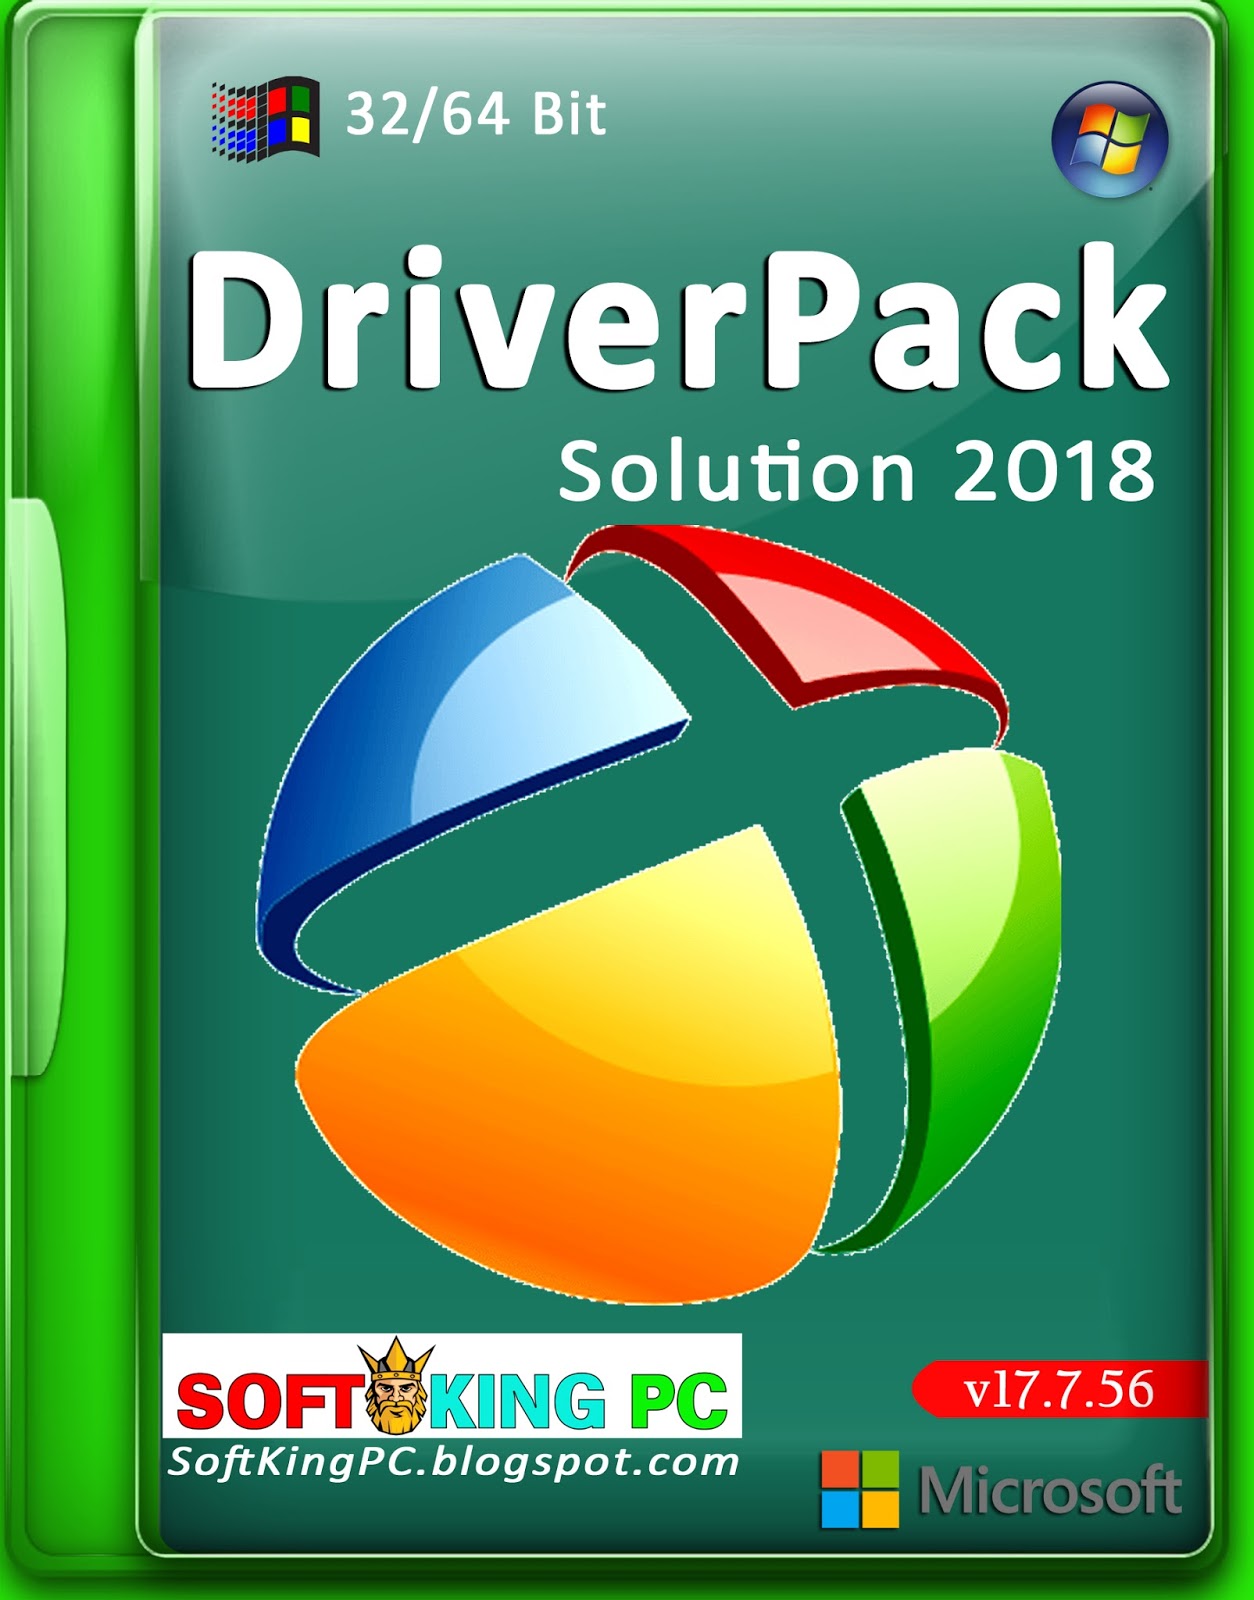 driverpack solution software